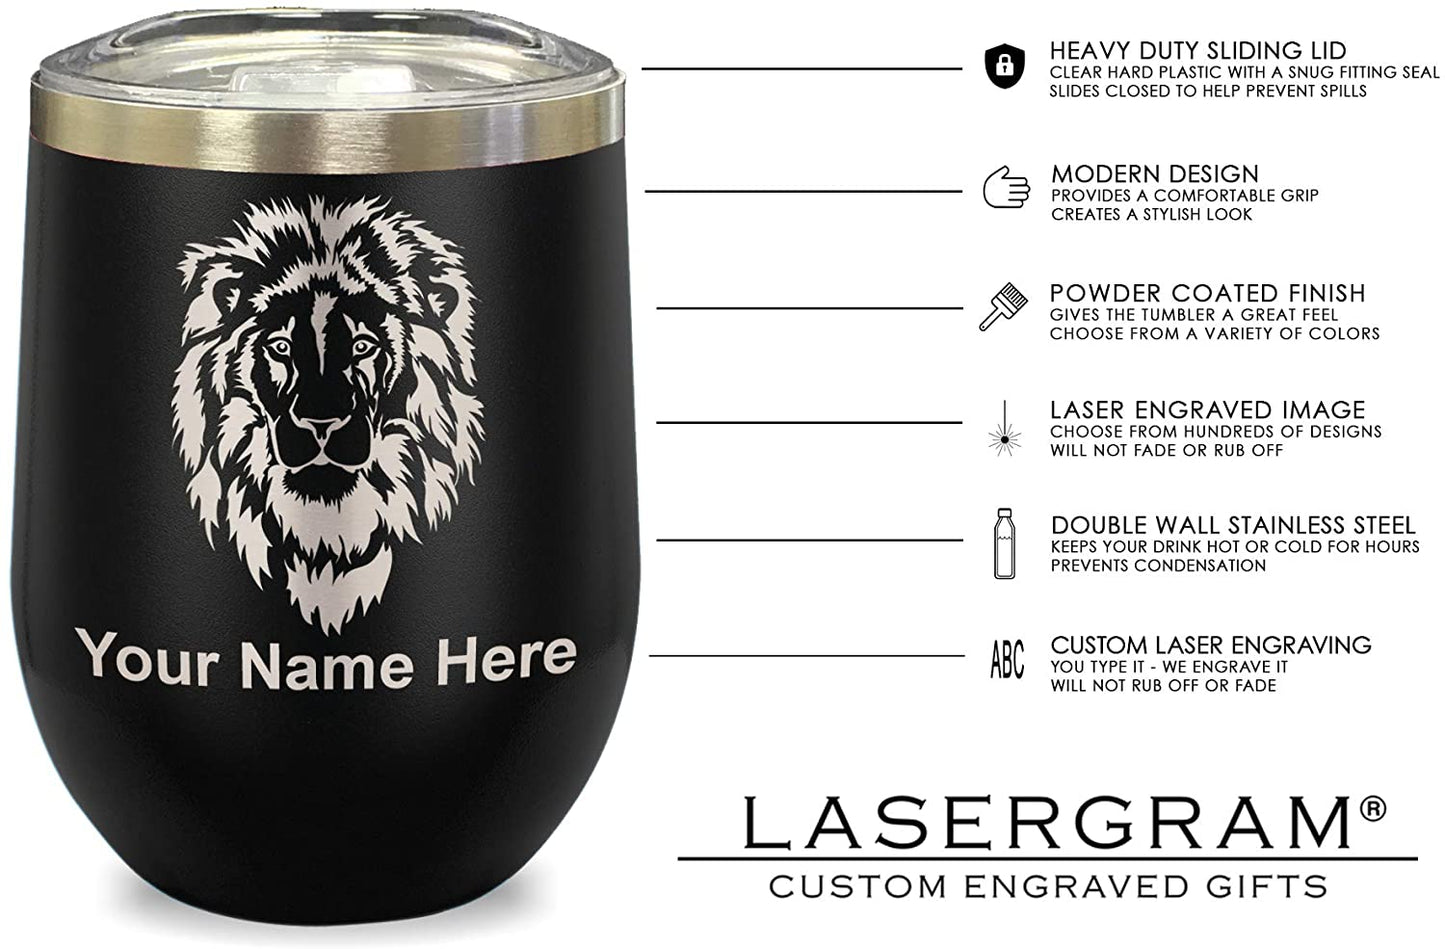 LaserGram Double Wall Stainless Steel Wine Glass, Rottweiler Dog, Personalized Engraving Included